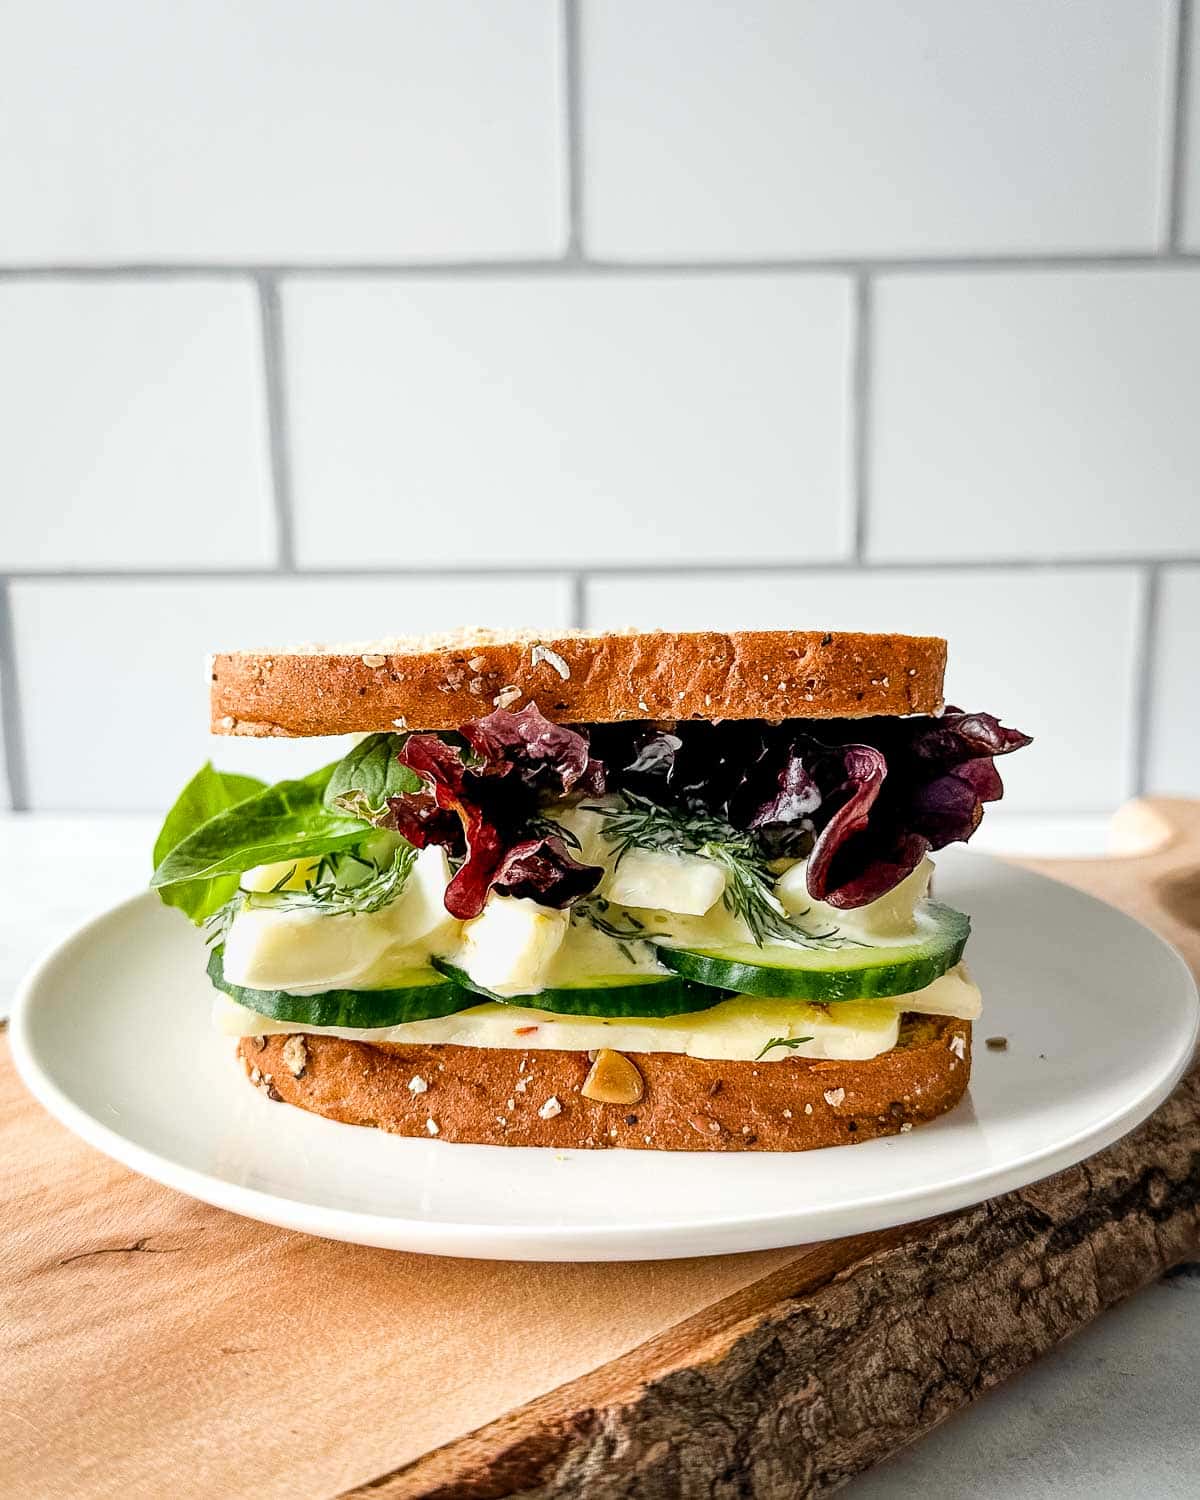 an egg and cucumber sandwich with pepper jack cheese, spring mix, and dill sauce is shown on a white plate over a rustic wooden cutting board.